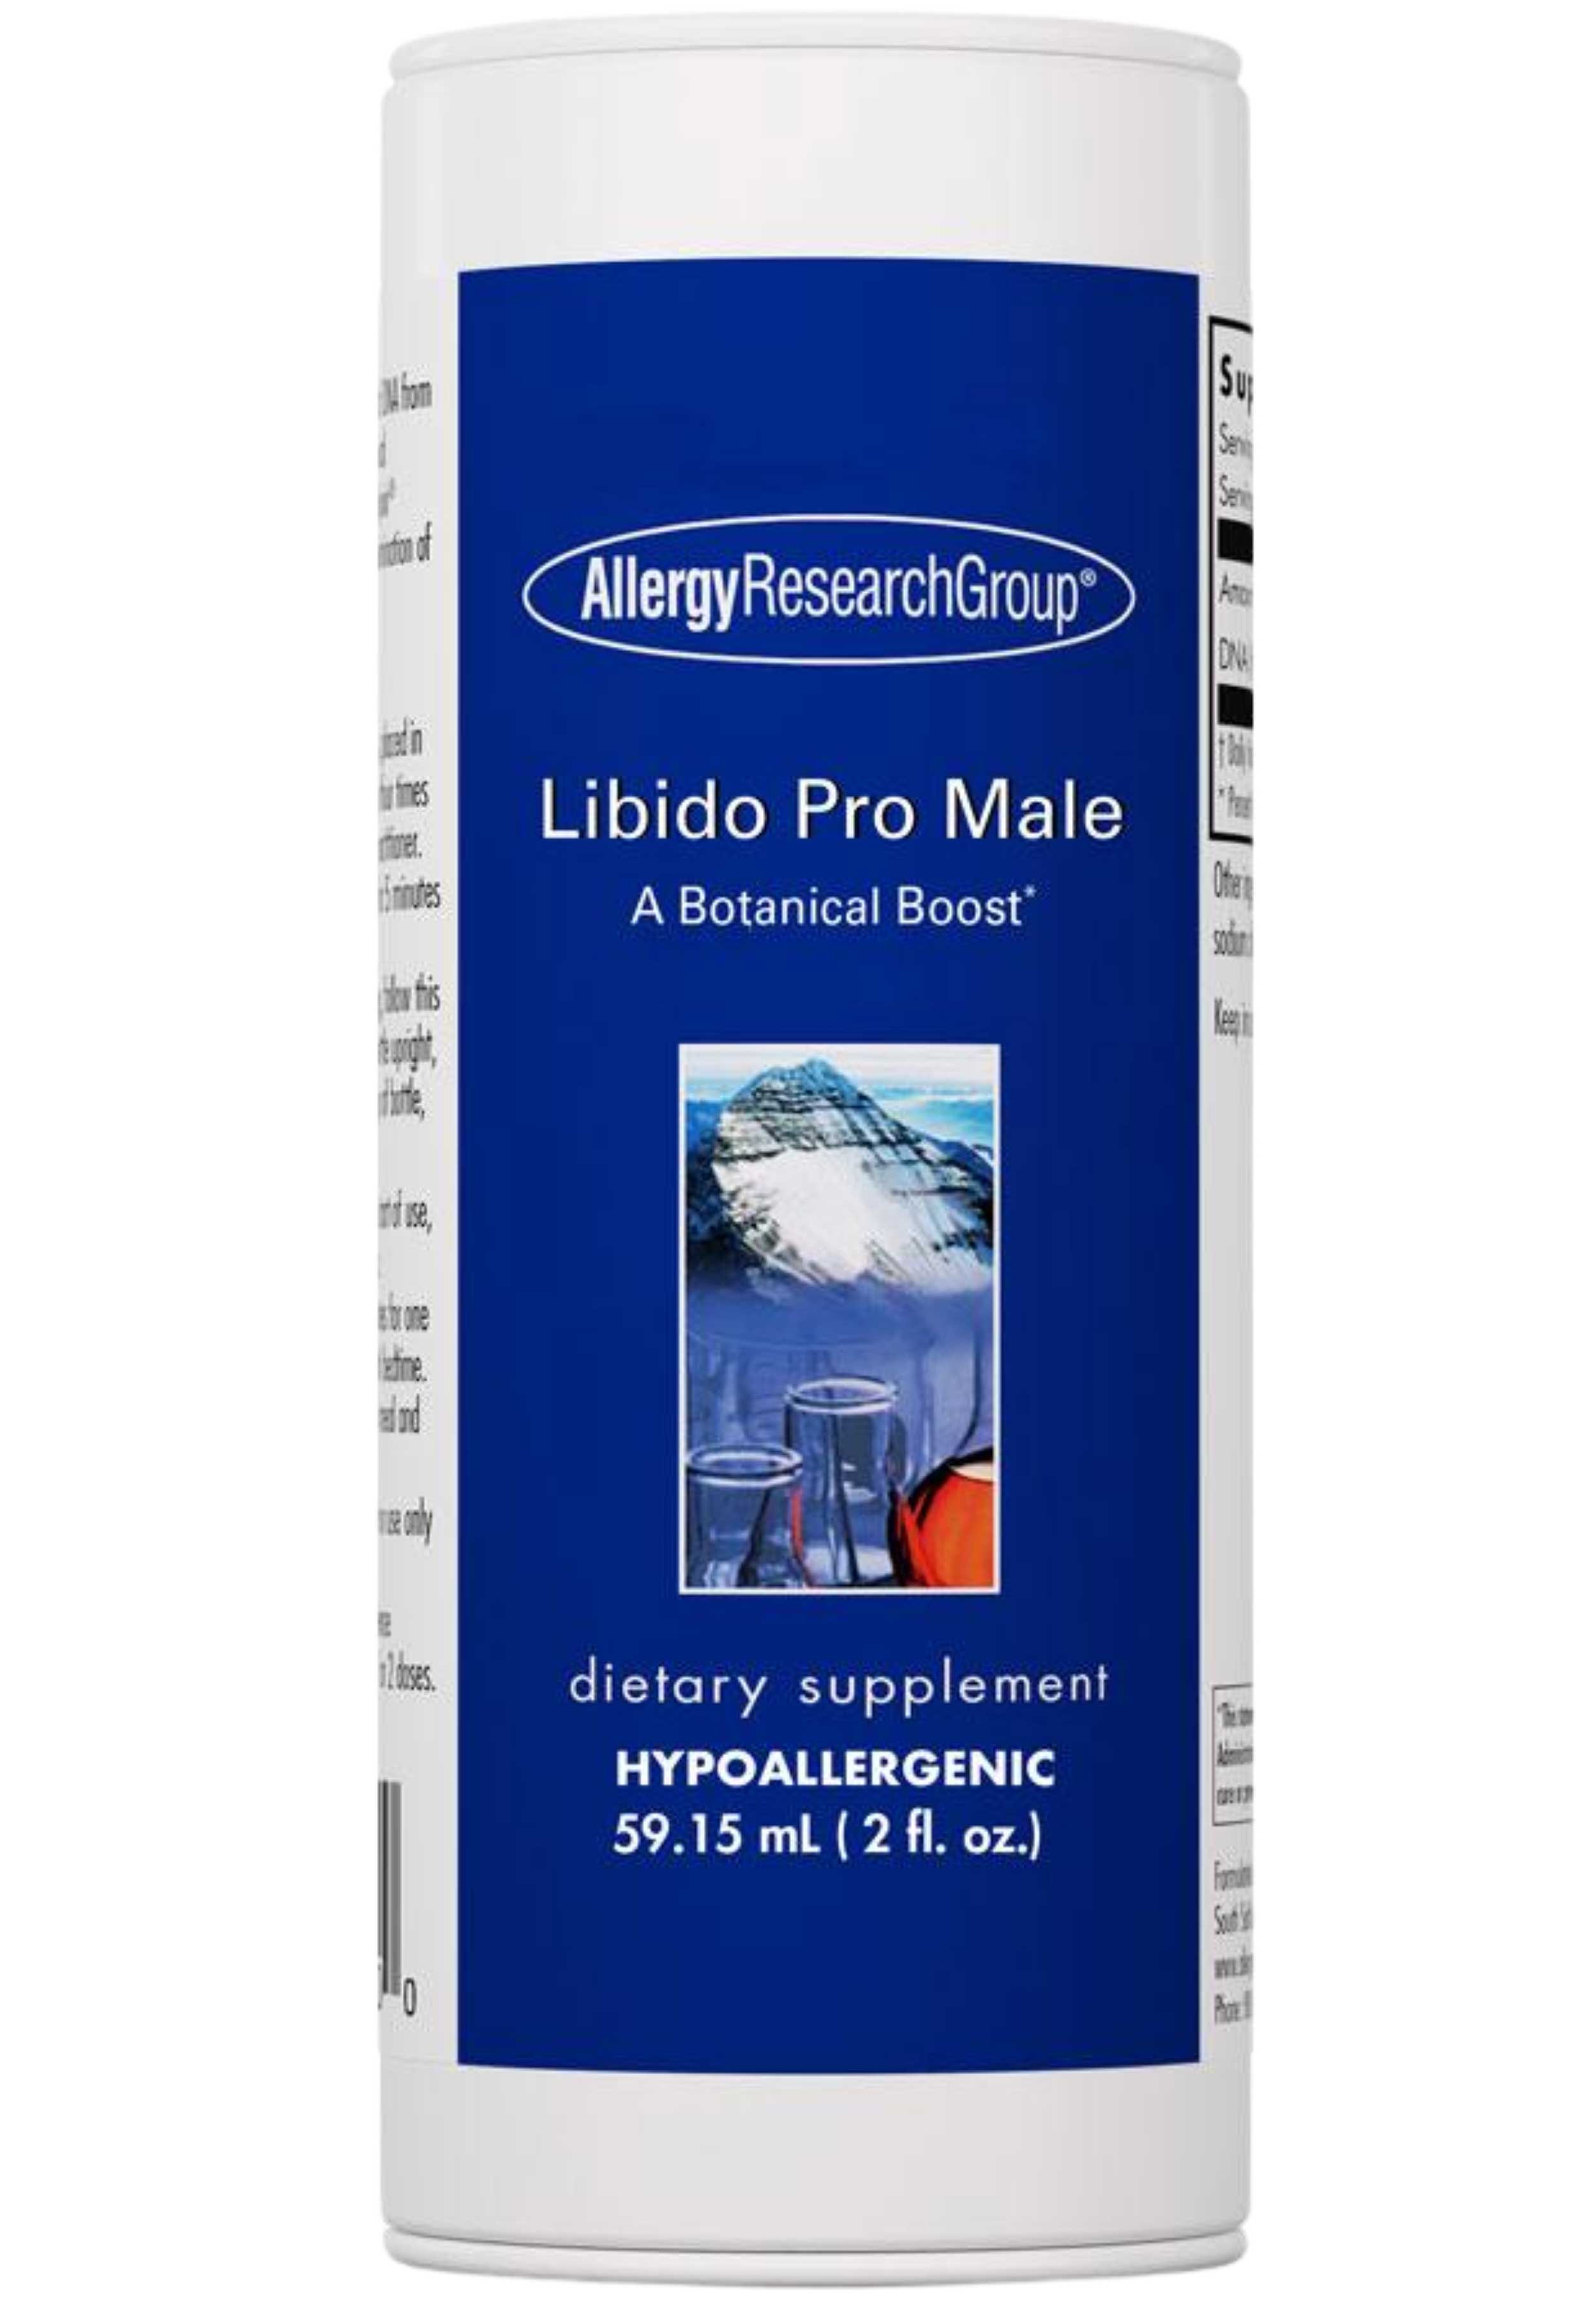 Allergy Research Group Libido Pro Male